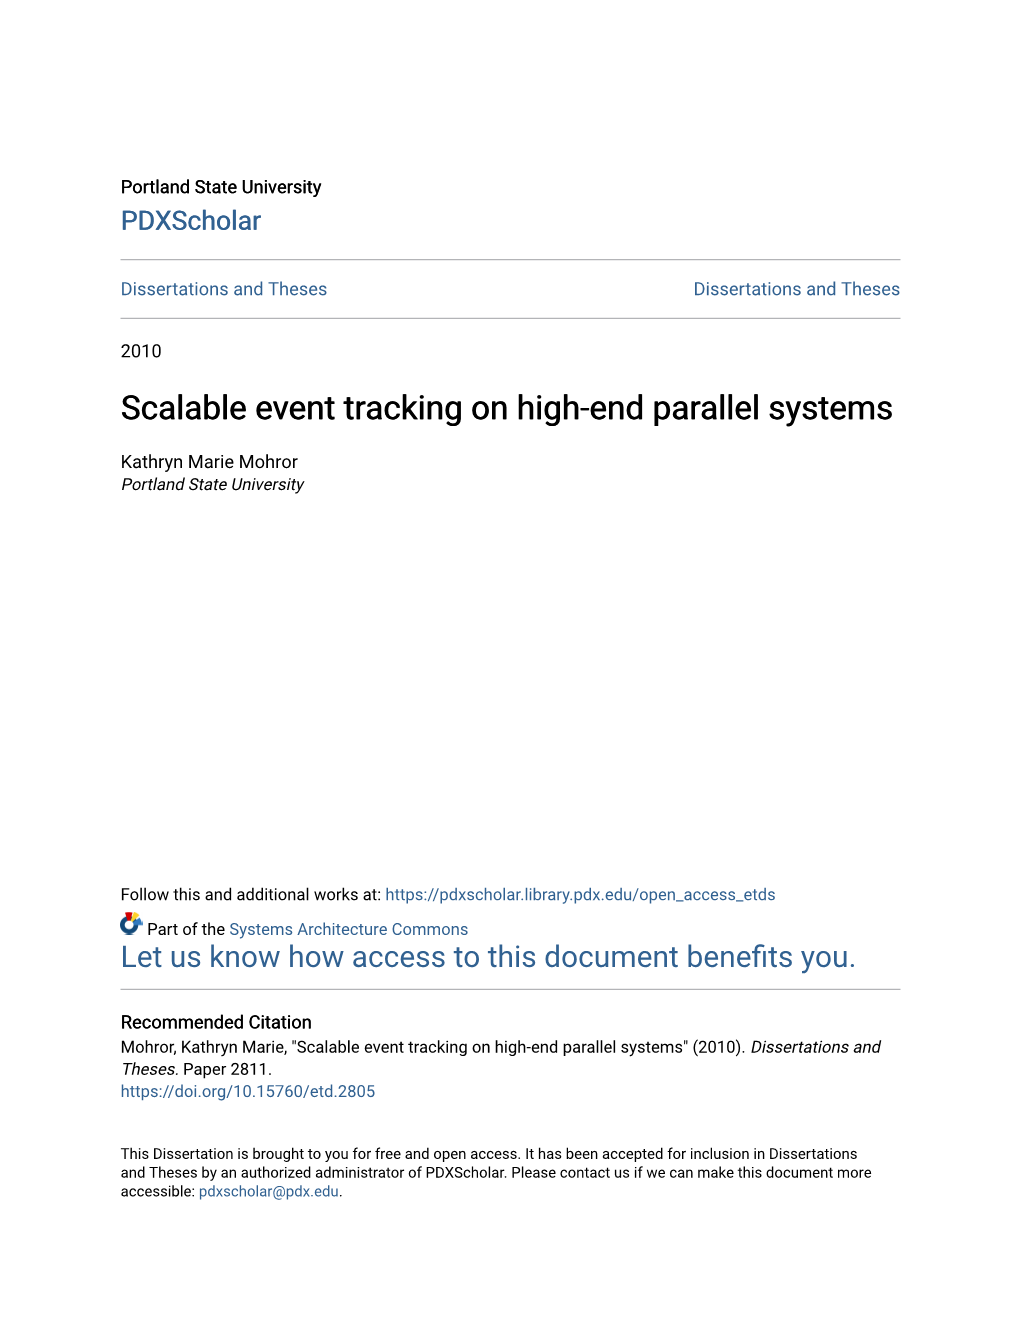 Scalable Event Tracking on High-End Parallel Systems